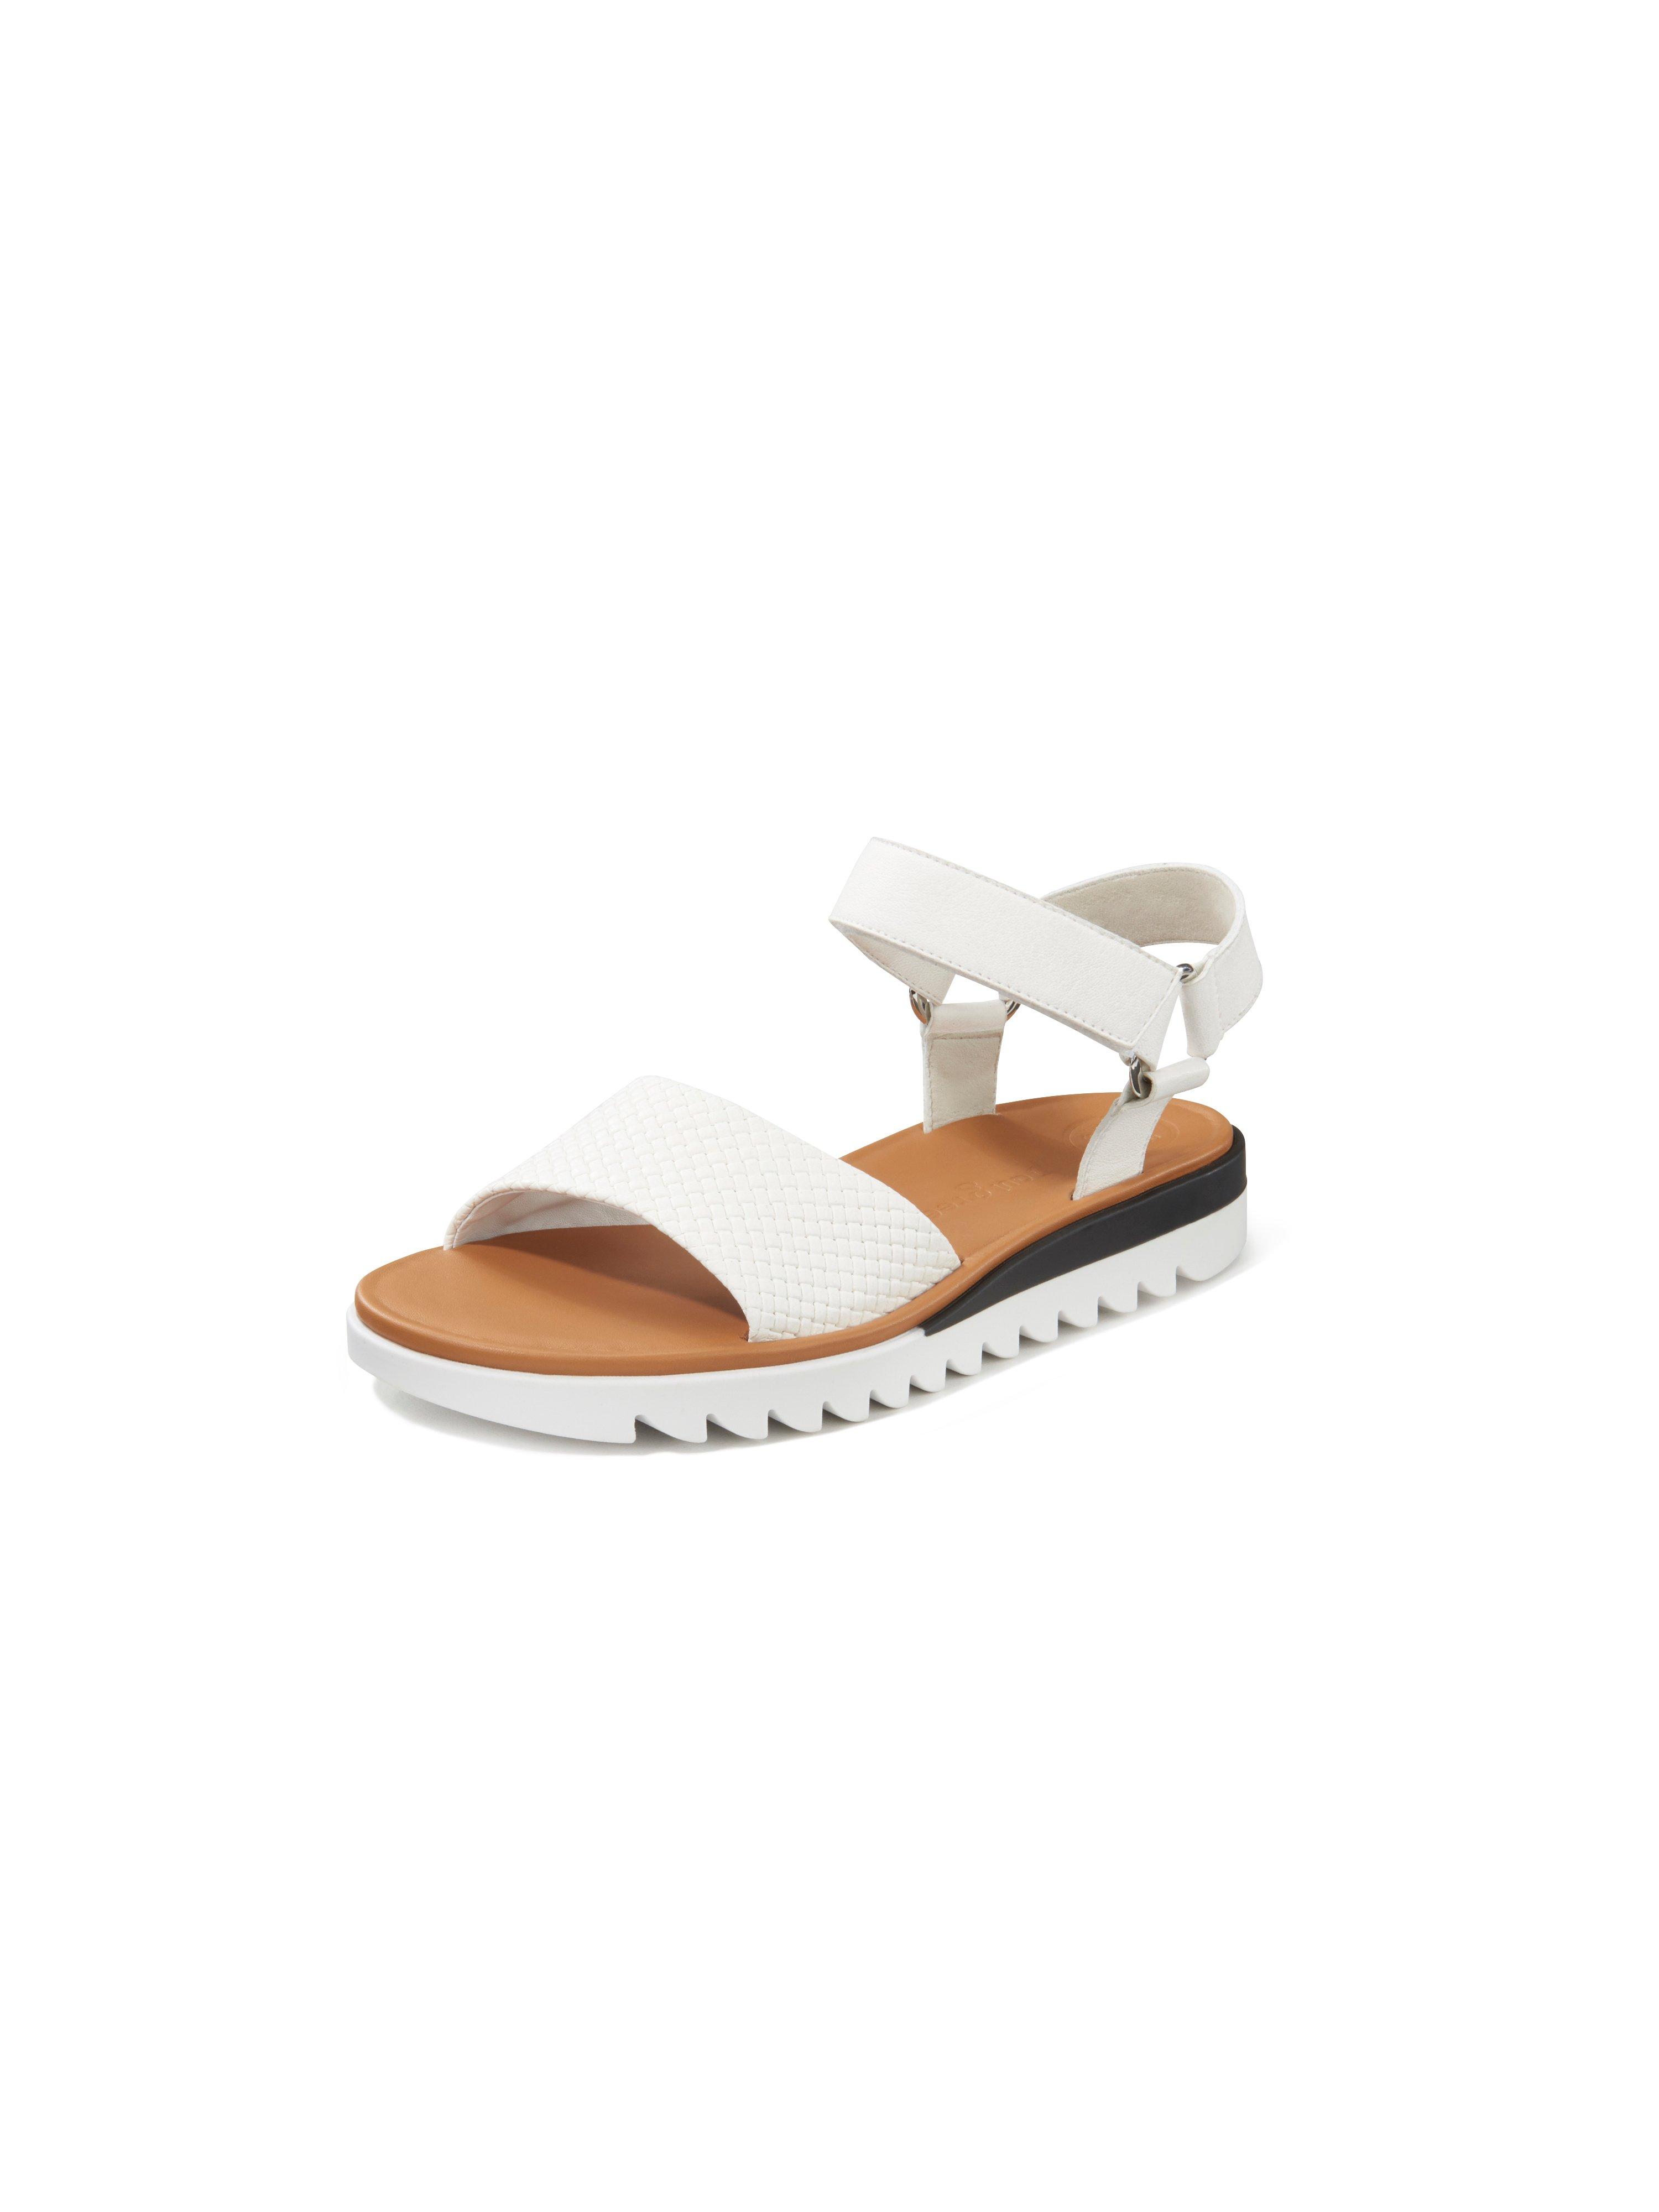 Paul Green - Sandals with a plaited look - white